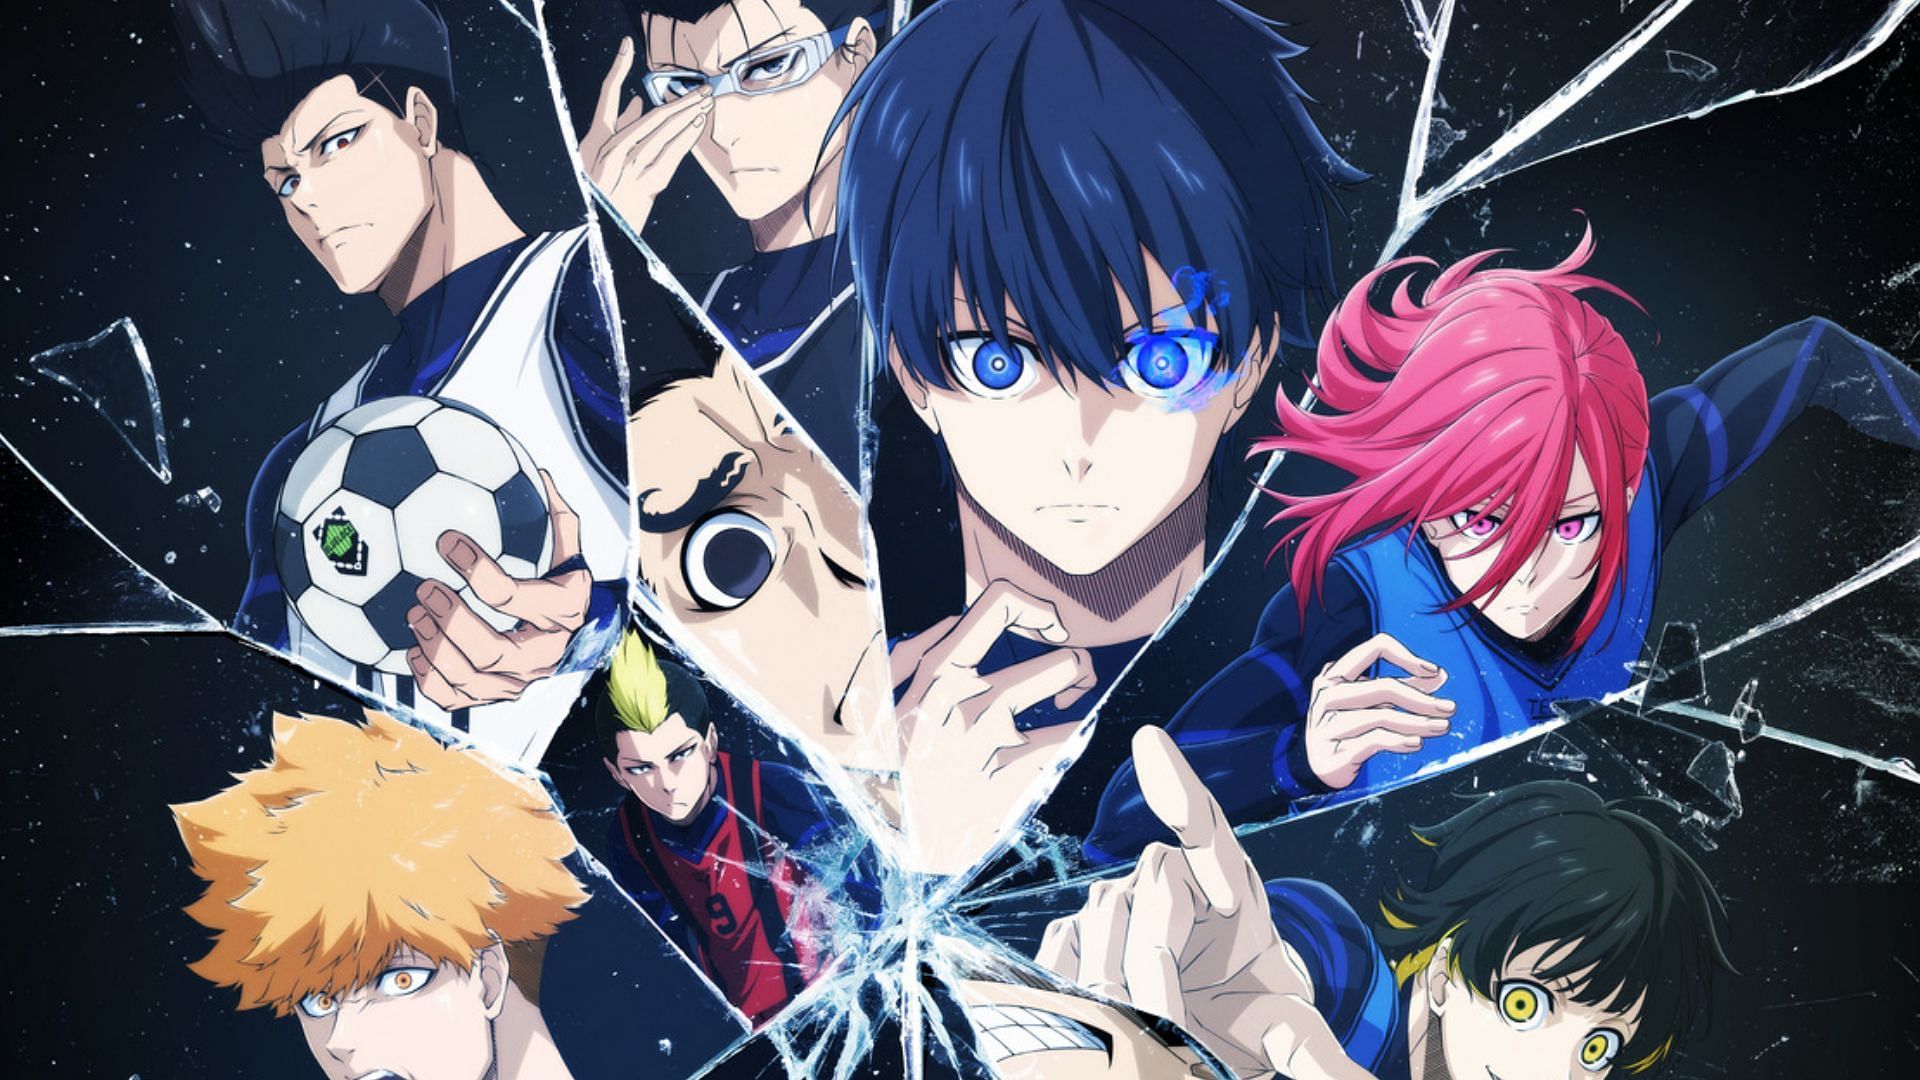 Blue Lock English dub official release date and voice actors revealed